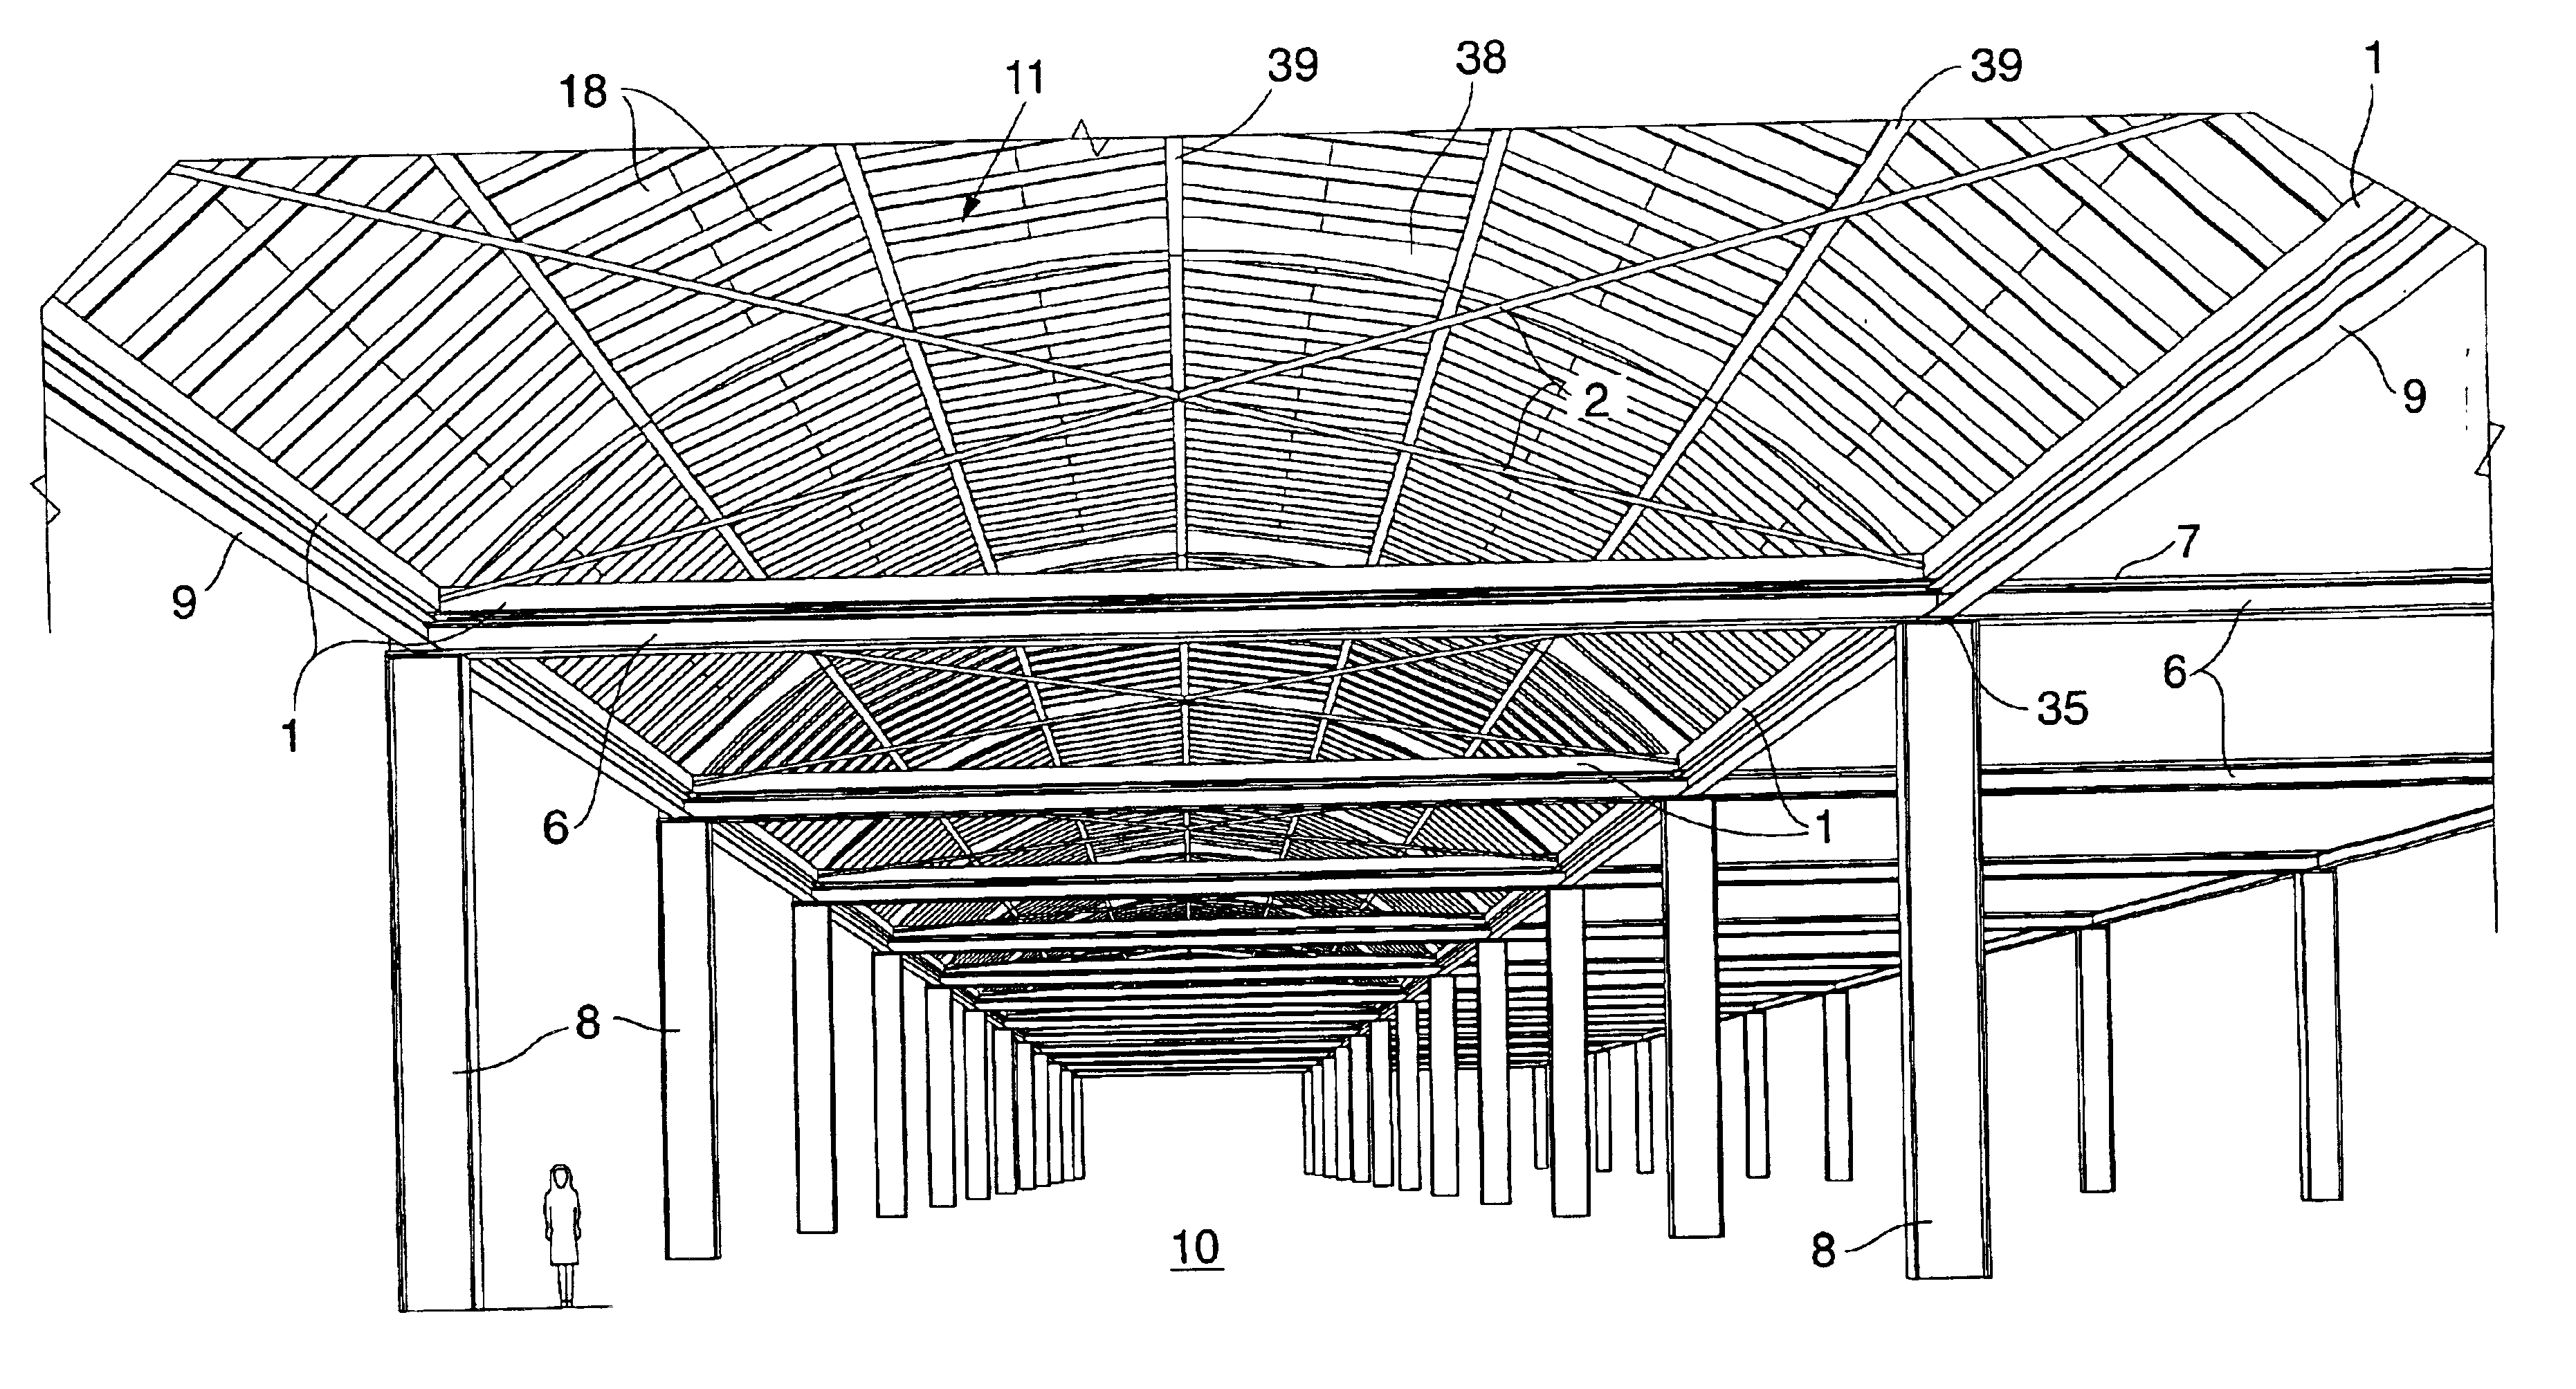 Retractable roof for a mall or other space